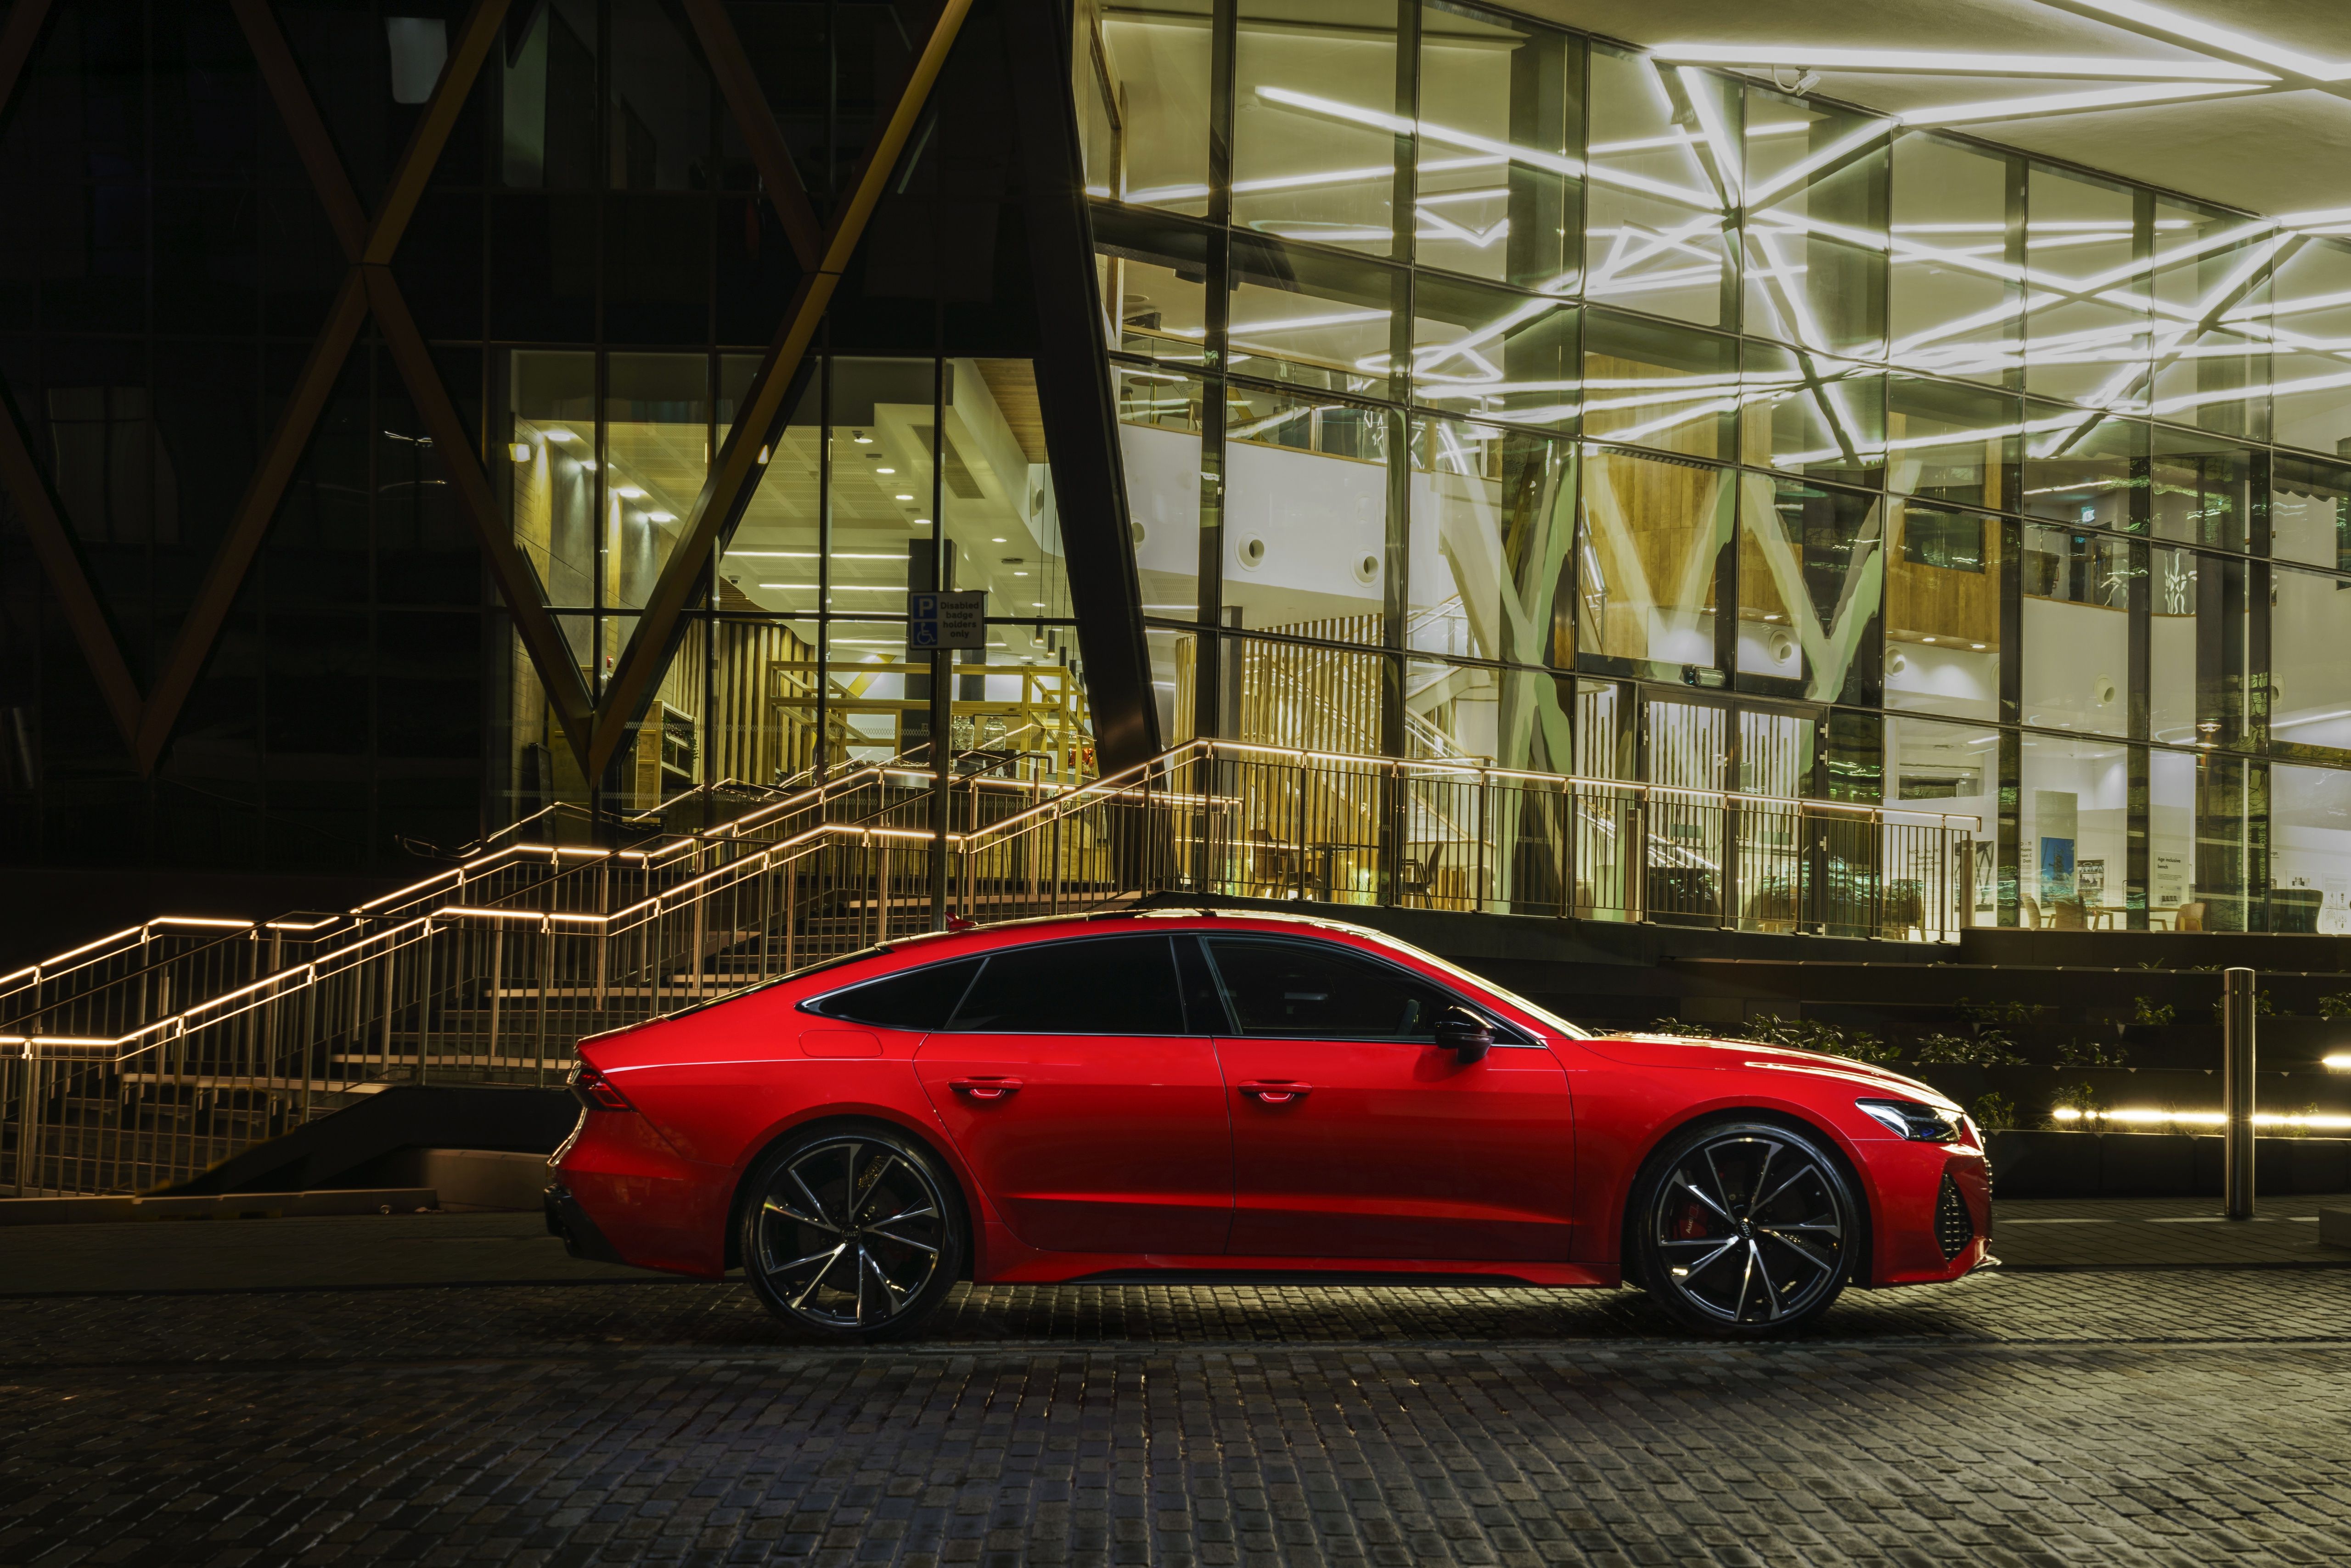  Audi RS7 Hintergrundbild 5120x3415. Audi RS7 Sportback Red 5k, HD Cars, 4k Wallpaper, Image, Background, Photo and Picture